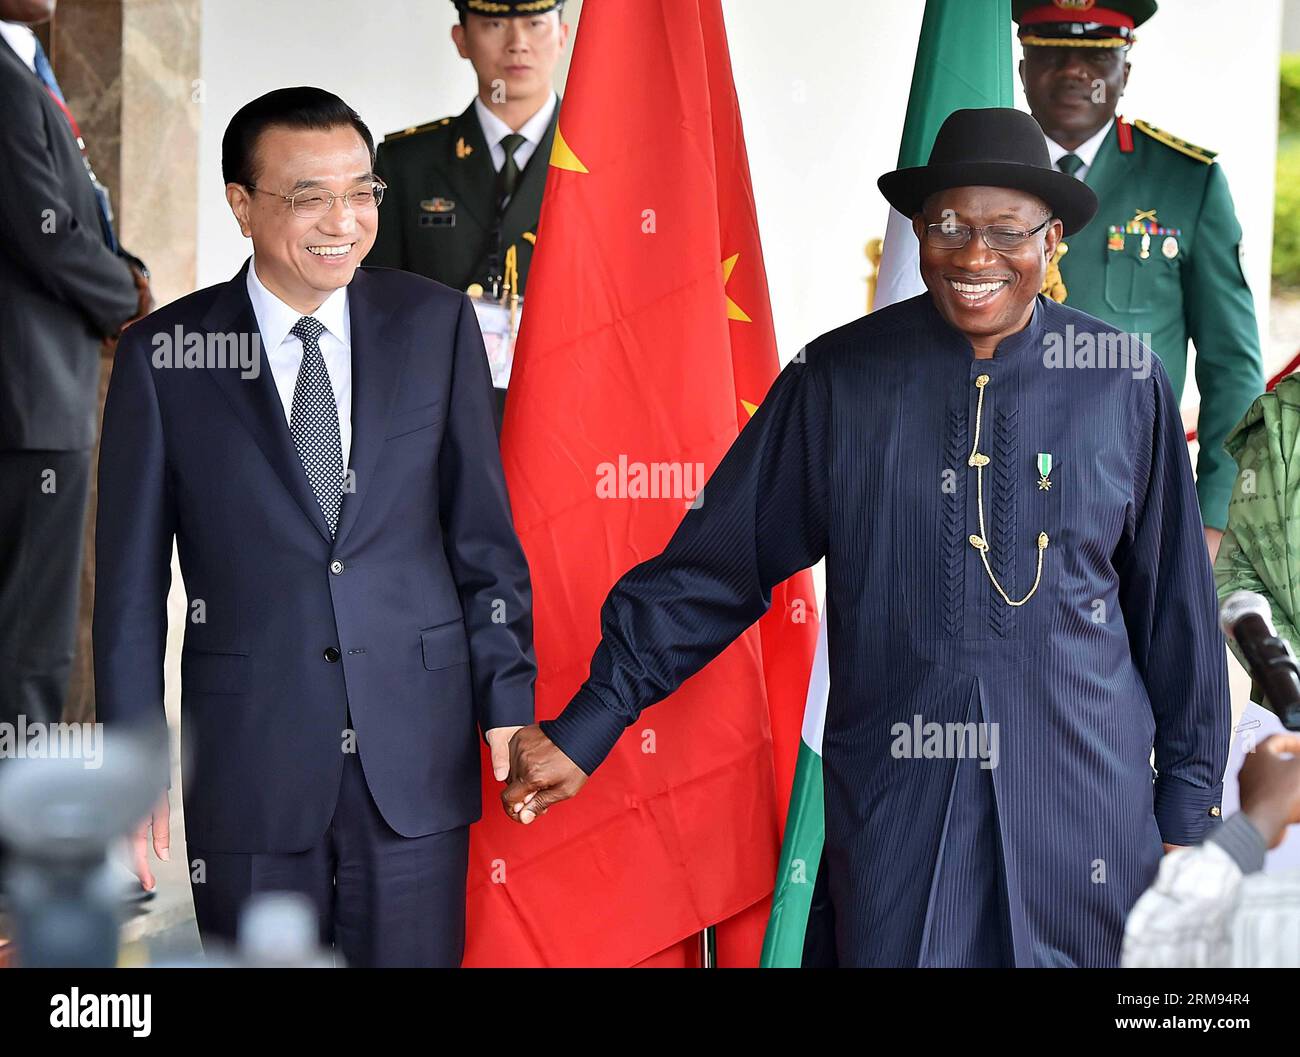 (140507) -- ABUJA, May 7, 2014 (Xinhua) -- Chinese Premier Li Keqiang (L) and Nigerian President Goodluck Jonathan attend a press conference after their talks in Abuja, Nigeria, May 7, 2014. (Xinhua/Li Tao) (mp) NIGERIA-CHINA-LI KEQIANG-GOODLUCK JONATHAN-PRESS CONFERENCE PUBLICATIONxNOTxINxCHN   Abuja May 7 2014 XINHUA Chinese Premier left Keqiang l and Nigerian President Goodluck Jonathan attend a Press Conference After their Talks in Abuja Nigeria May 7 2014 XINHUA left Tao MP Nigeria China left Keqiang Goodluck Jonathan Press Conference PUBLICATIONxNOTxINxCHN Stock Photo